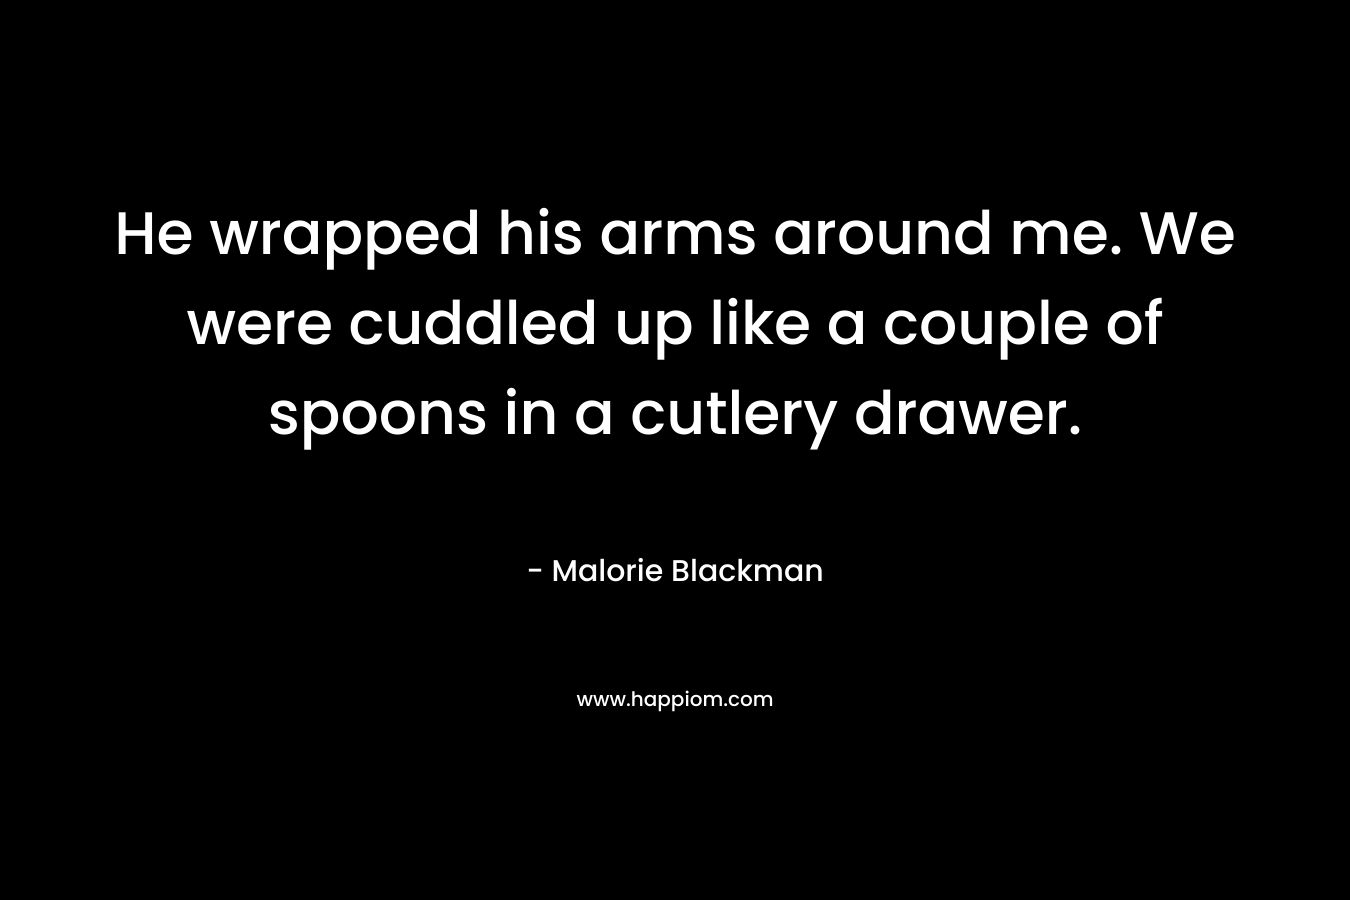 He wrapped his arms around me. We were cuddled up like a couple of spoons in a cutlery drawer. – Malorie Blackman